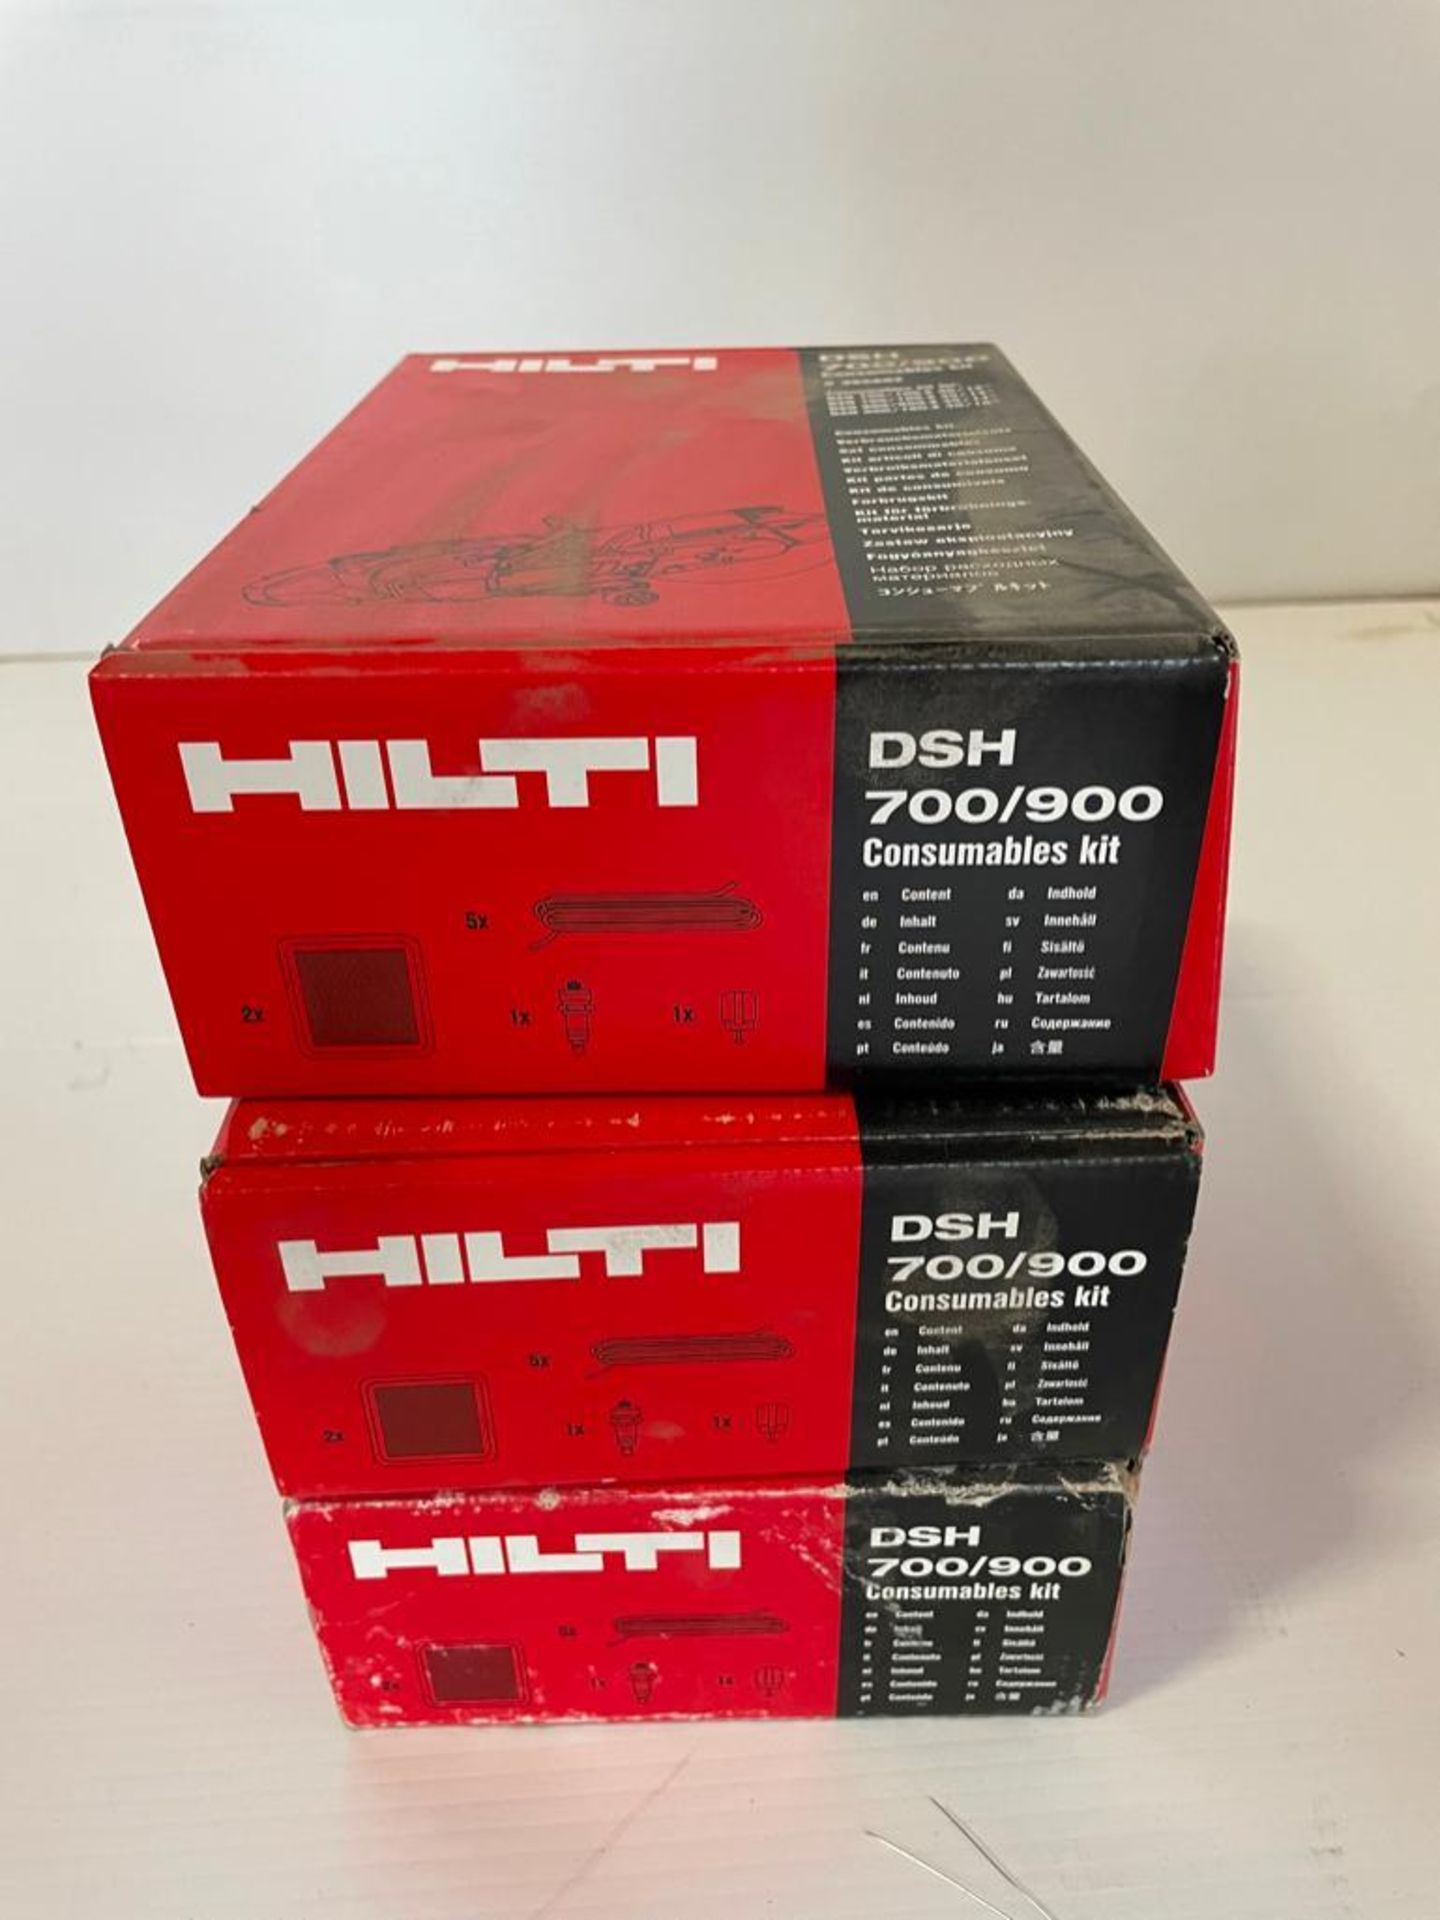 Hilti DSH 700/9000 Consumables Kit. Located in Hazelwood, MO - Image 2 of 3